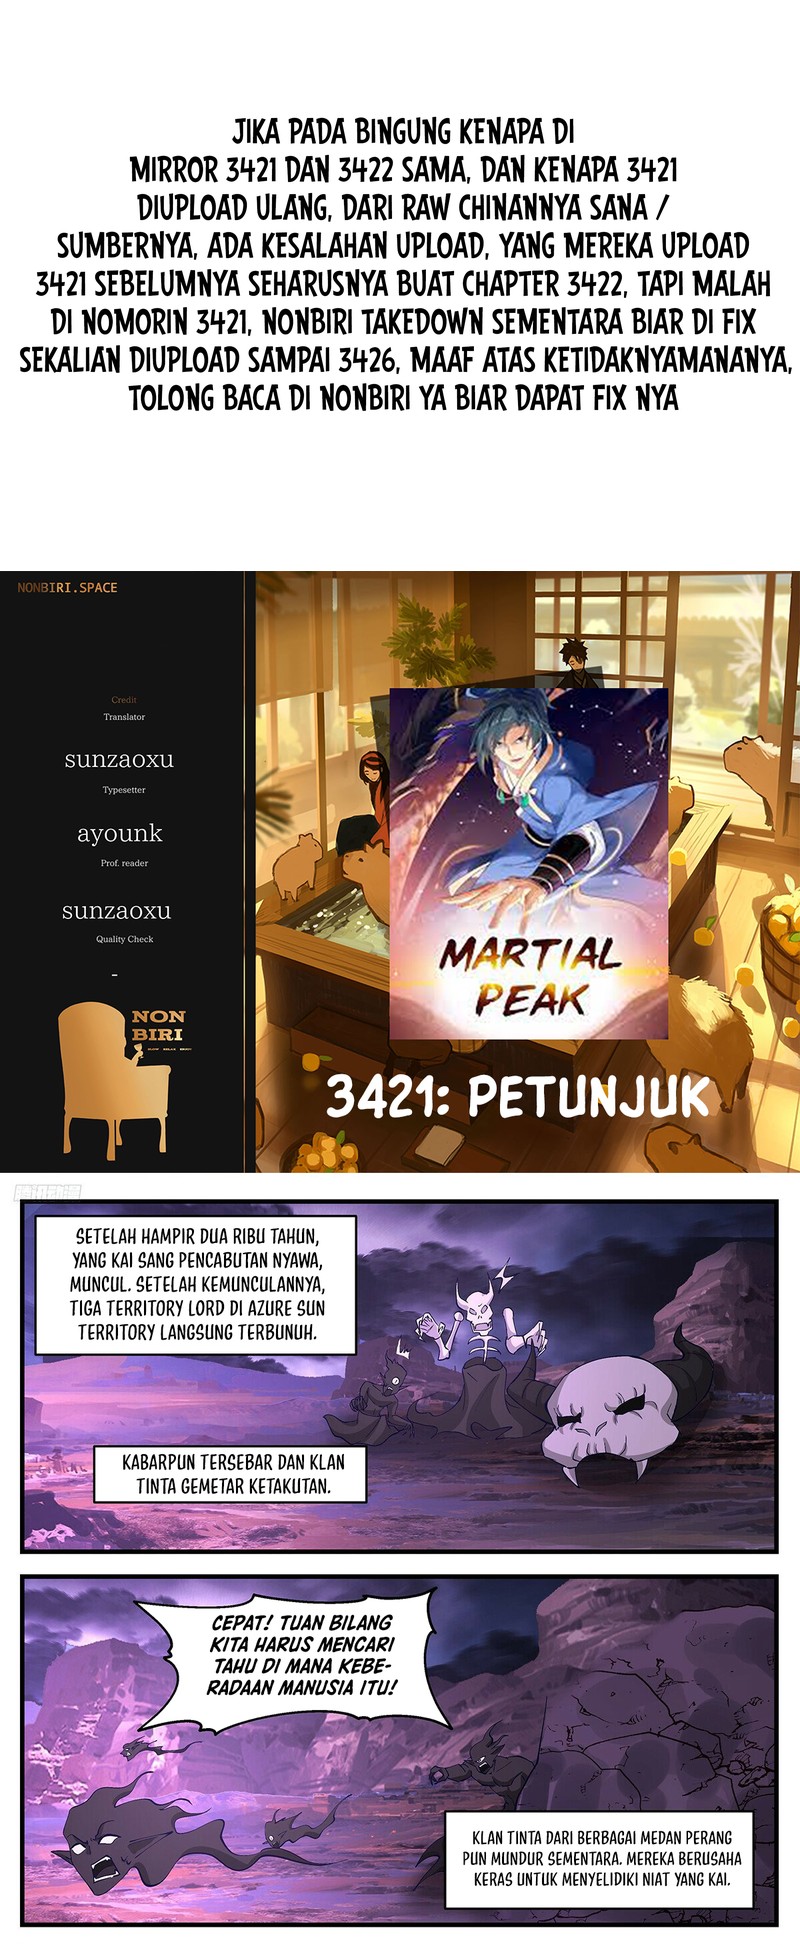 Martial Peak: Chapter 3422 - Page 1